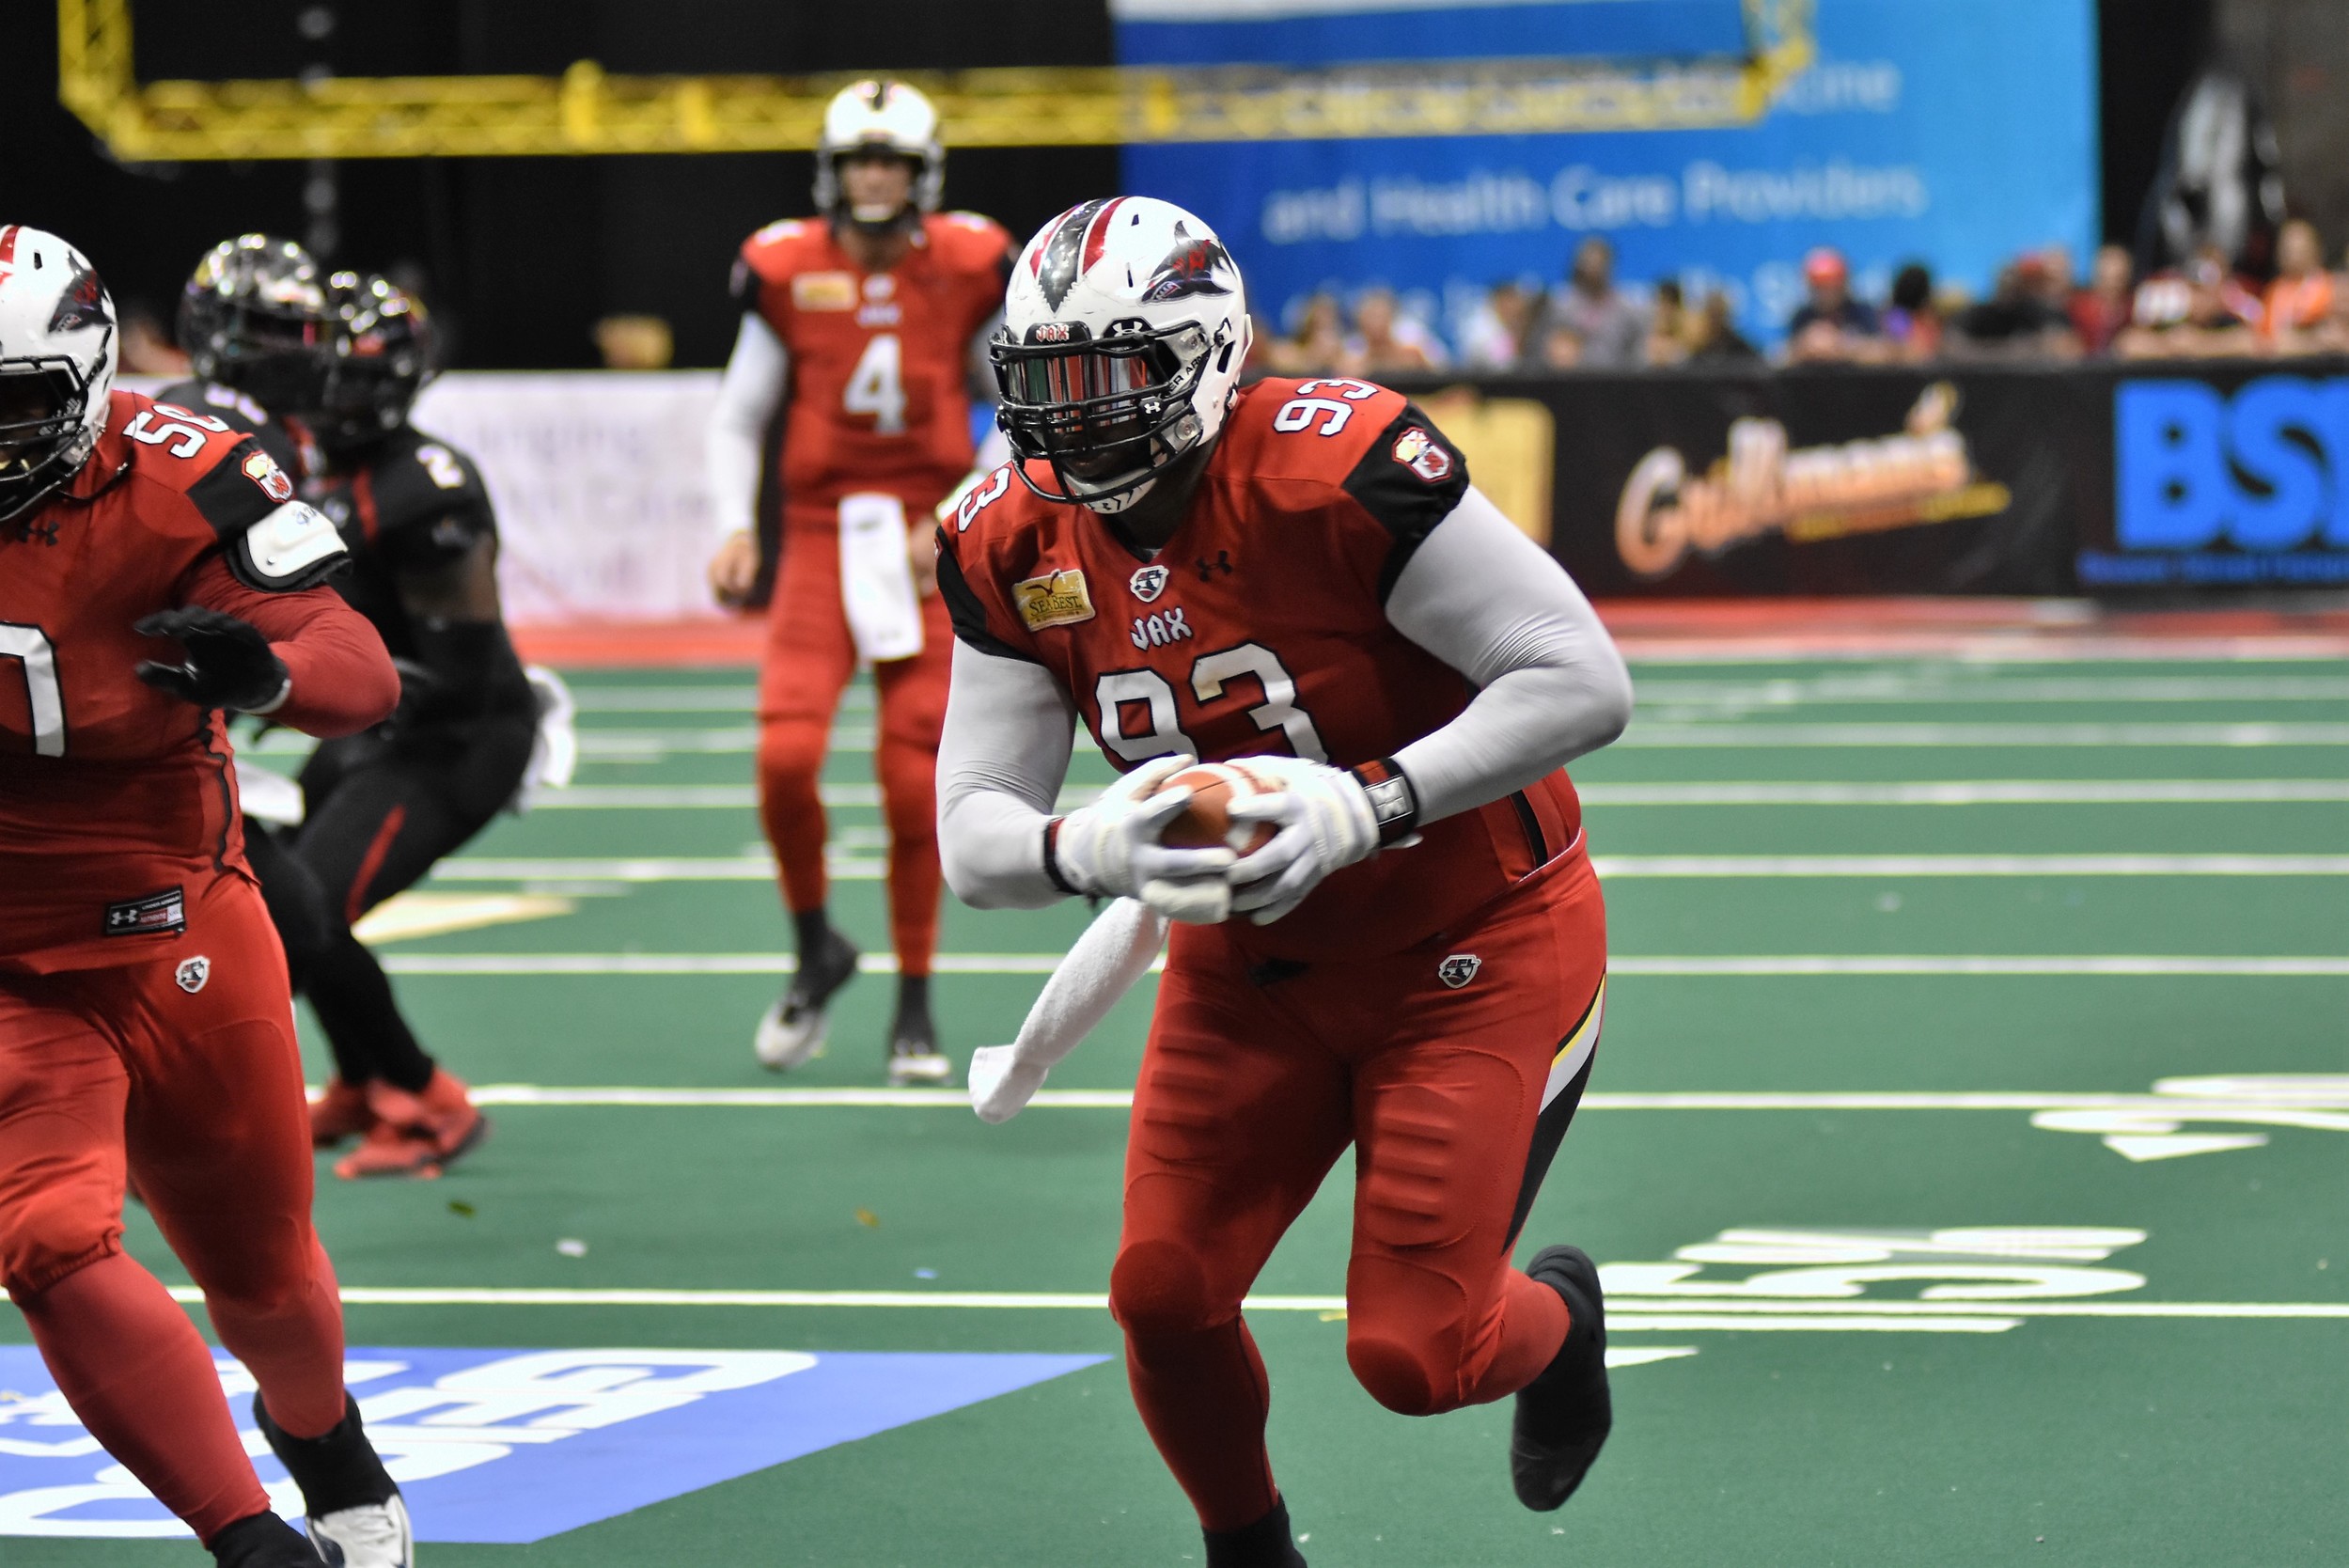 The Jacksonville Sharks (7-10) endured a season that ended with an appearance in the American Conference Championship.